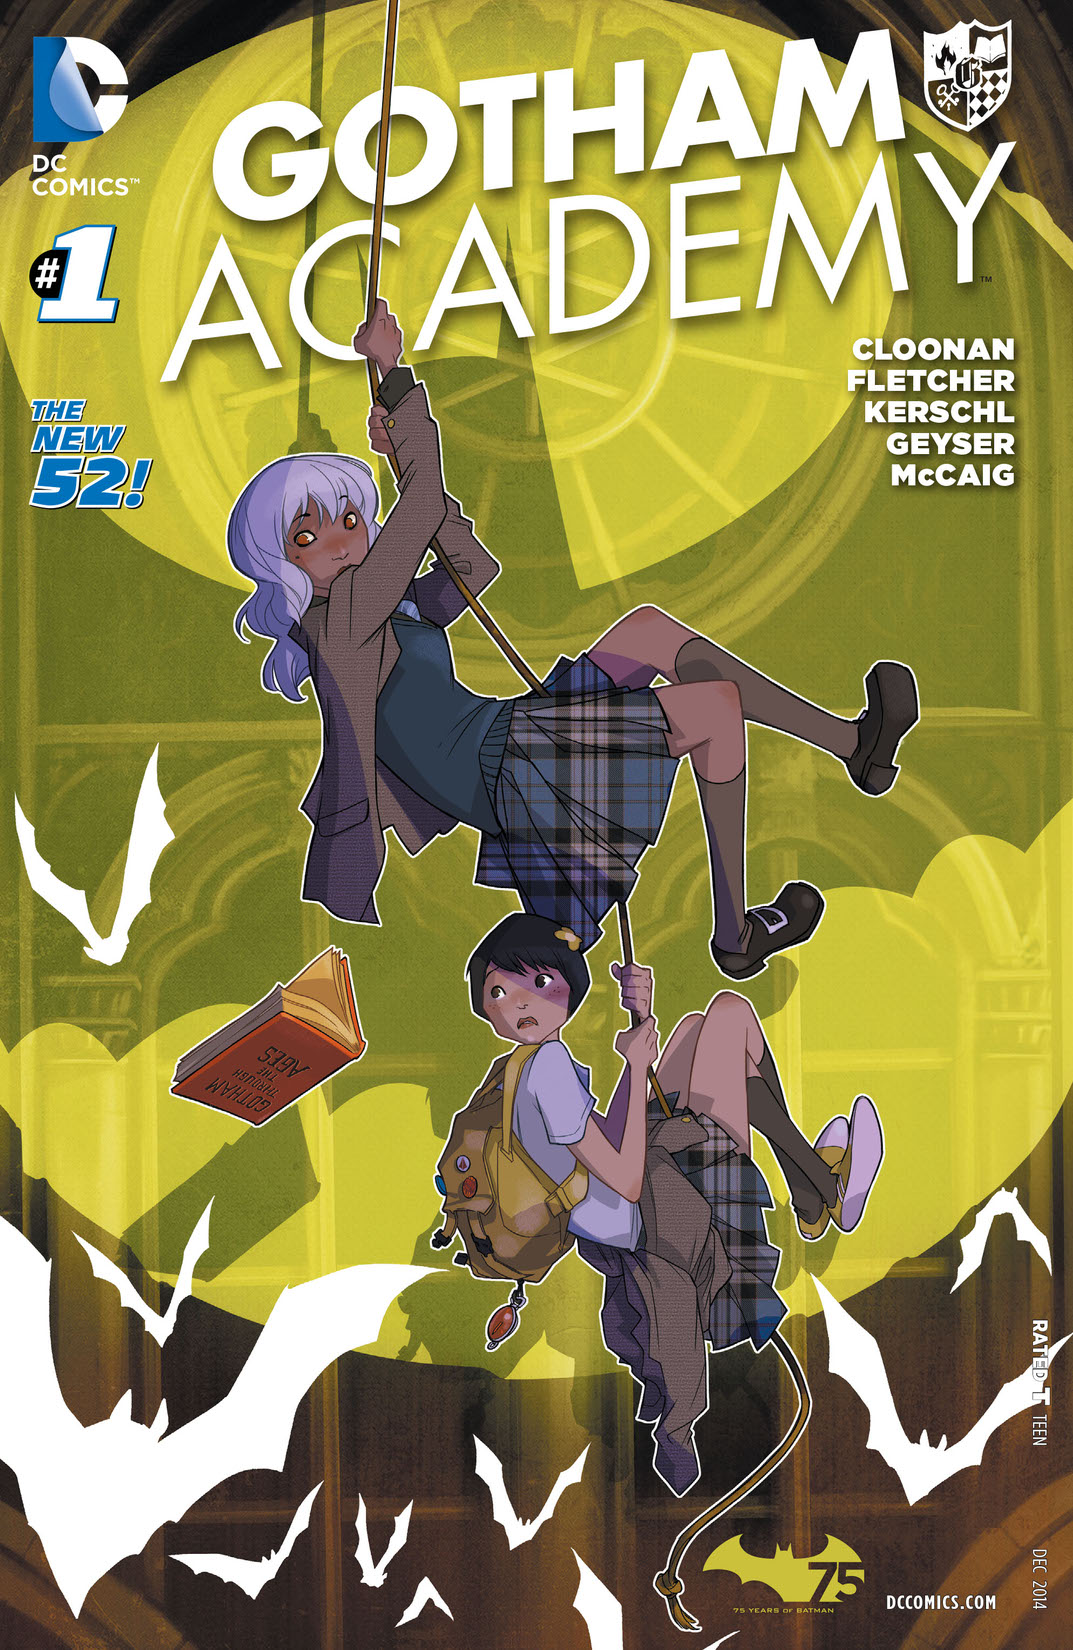 Gotham Academy #1 preview images